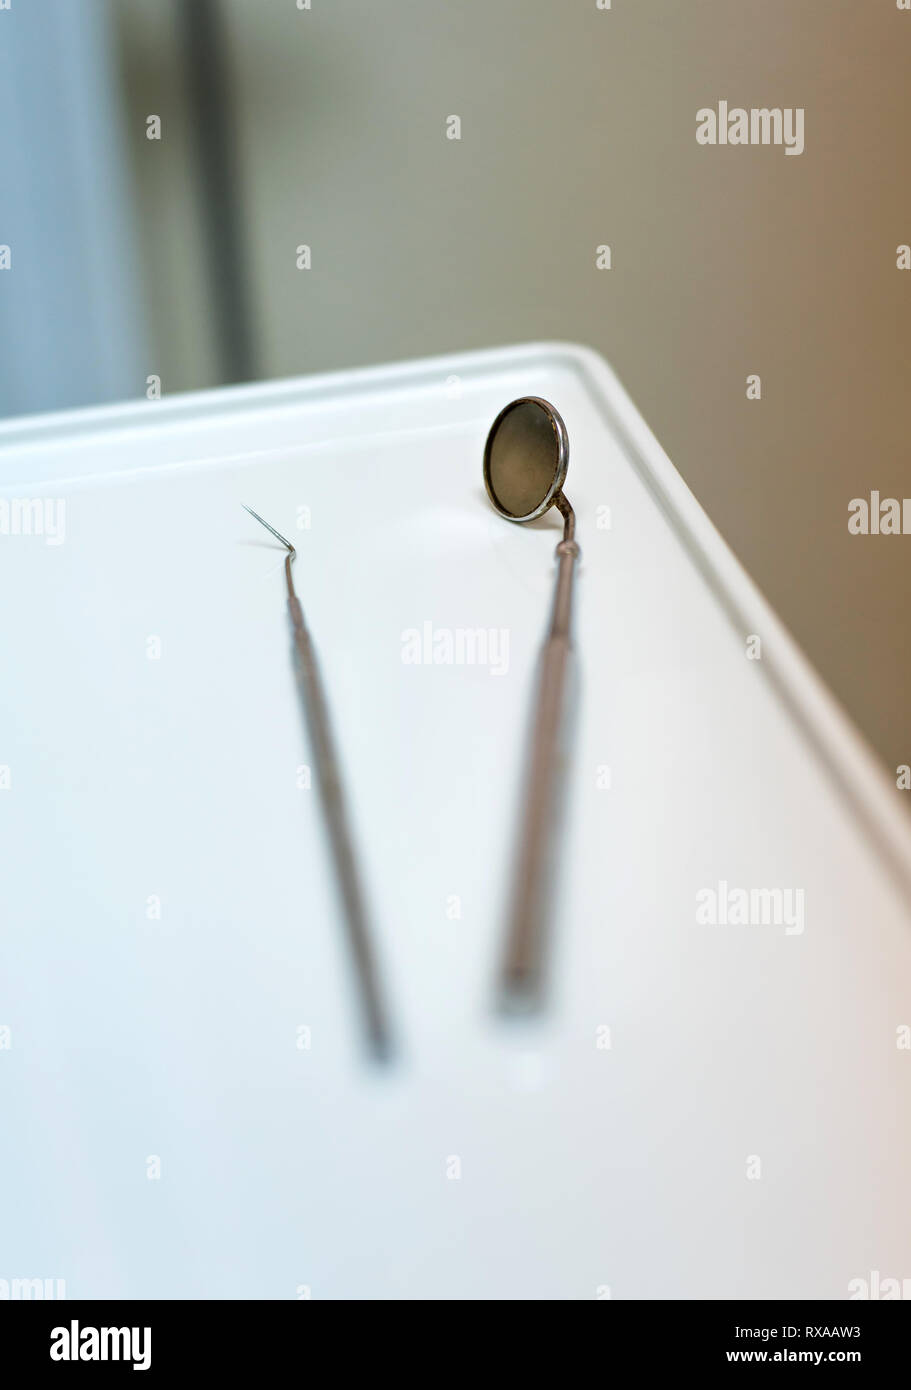 Dental mirror and a probe close up Stock Photo